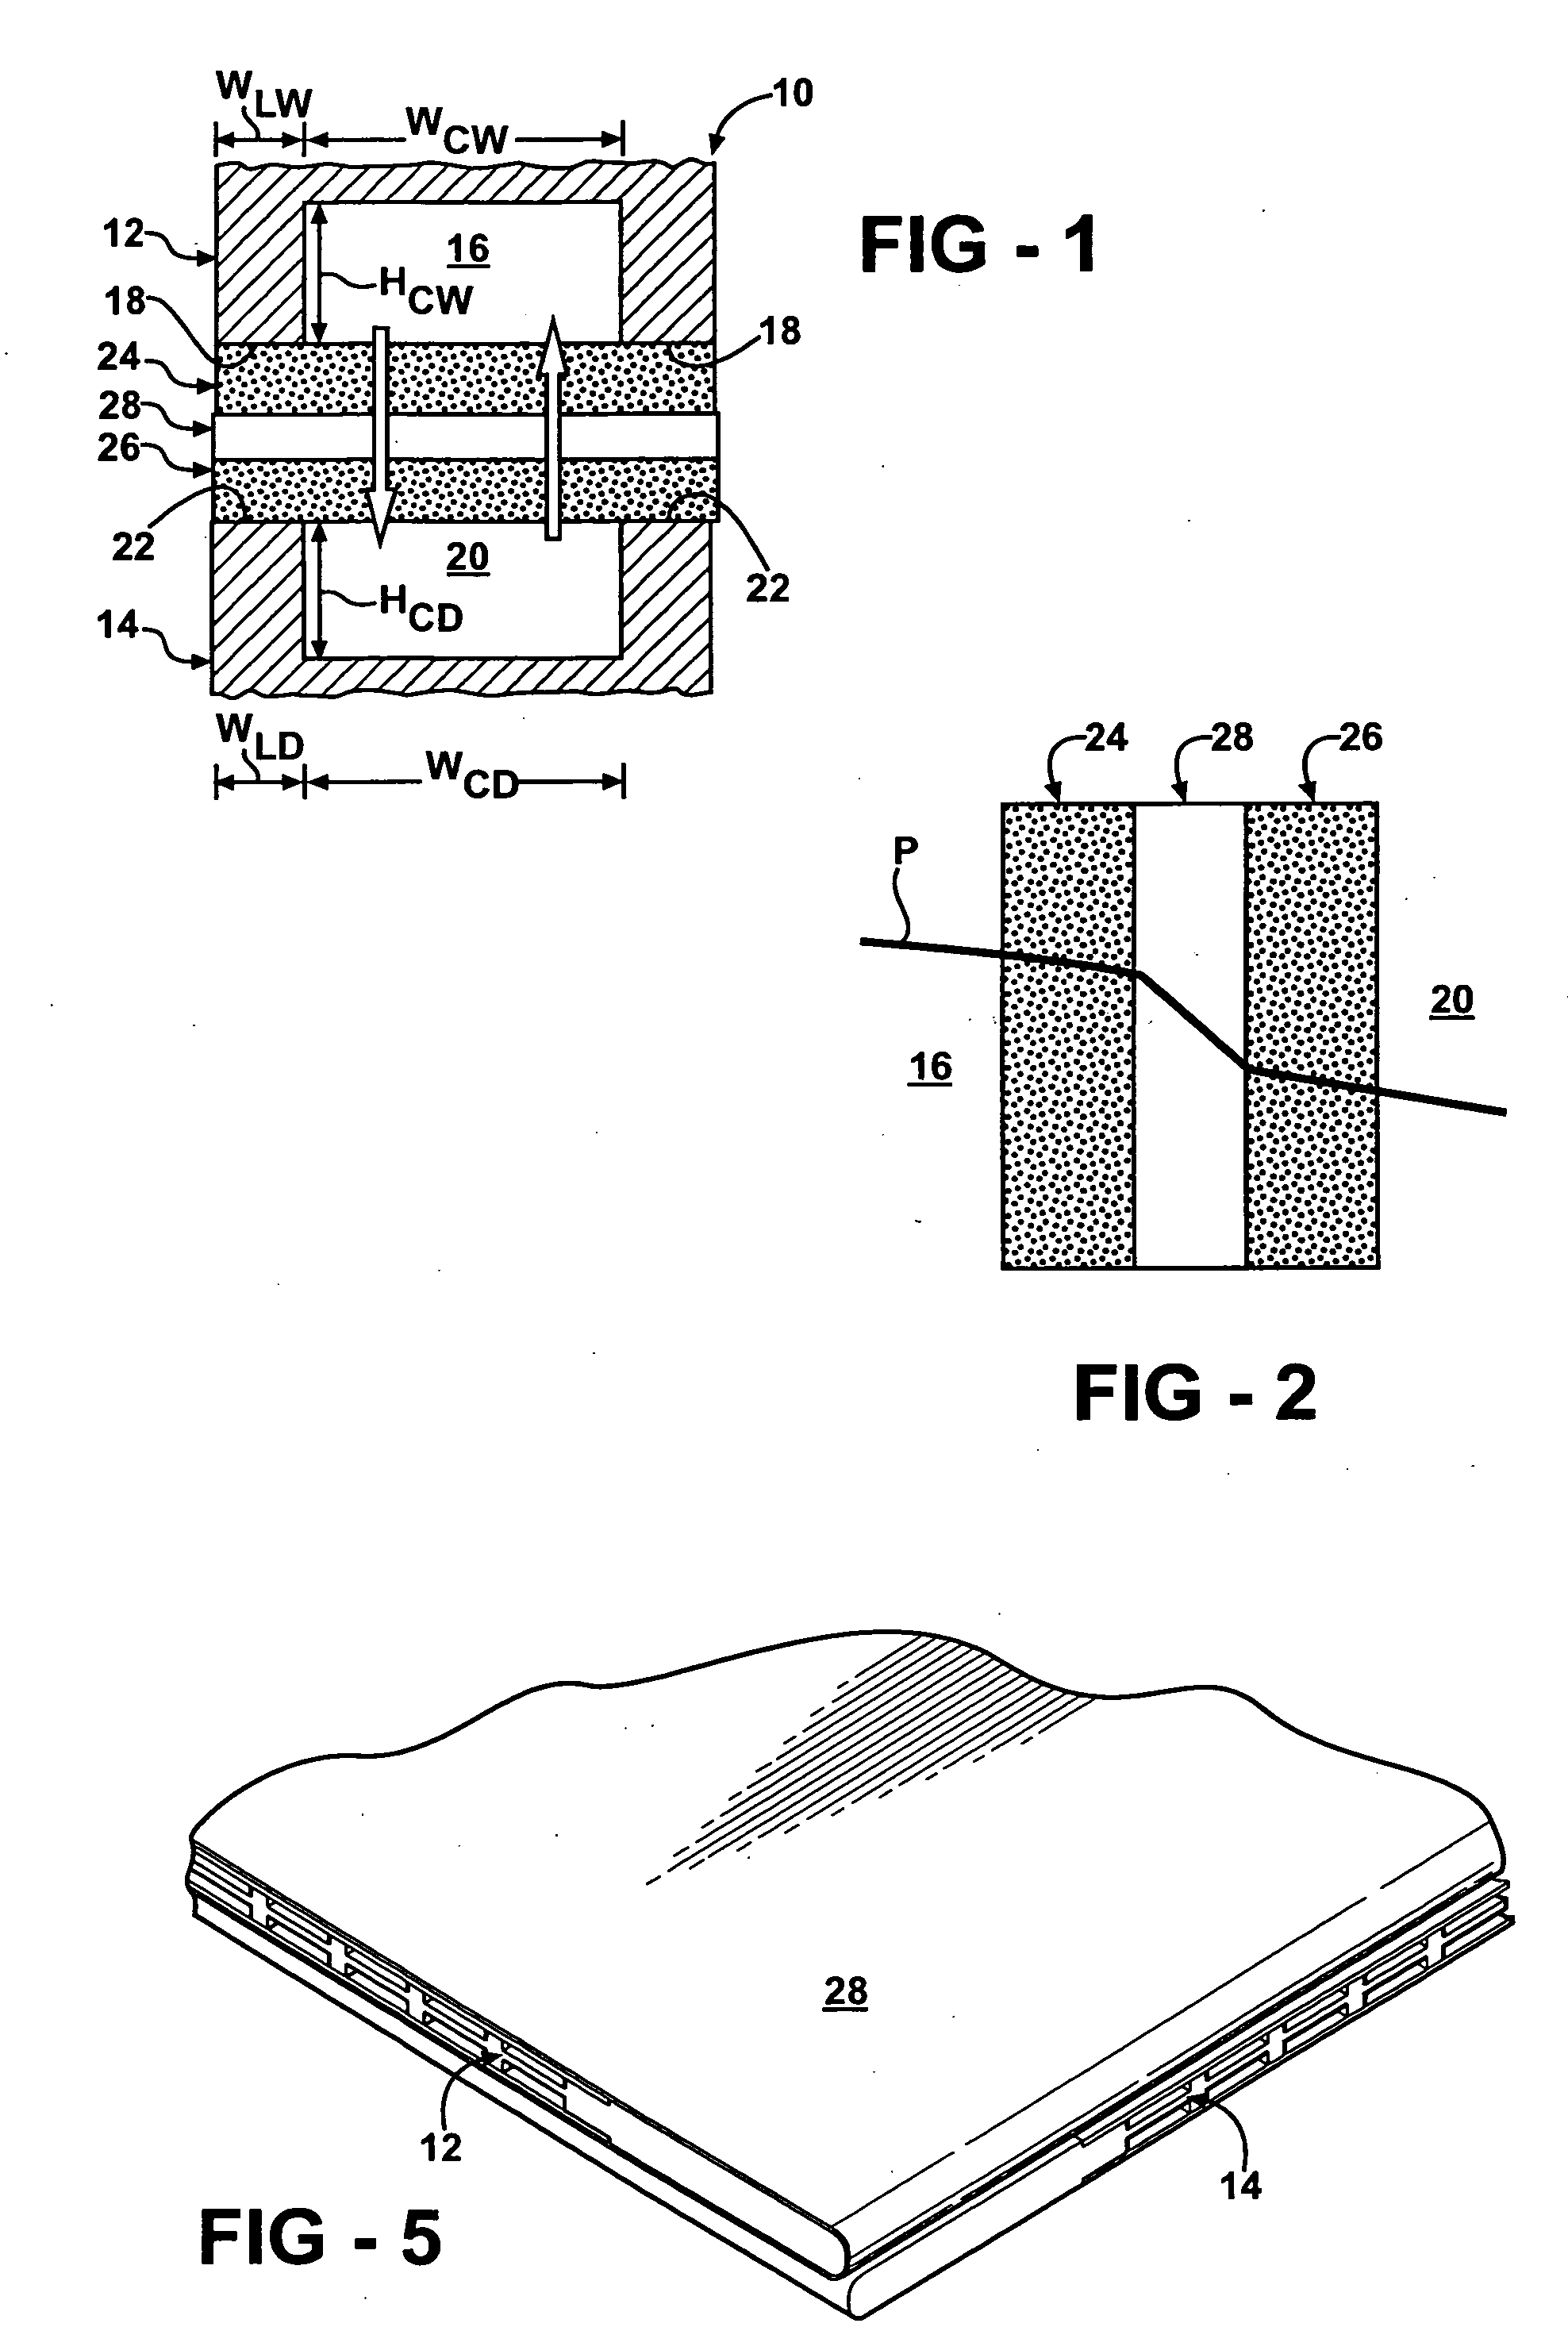 Membrane humidifier for a fuel cell